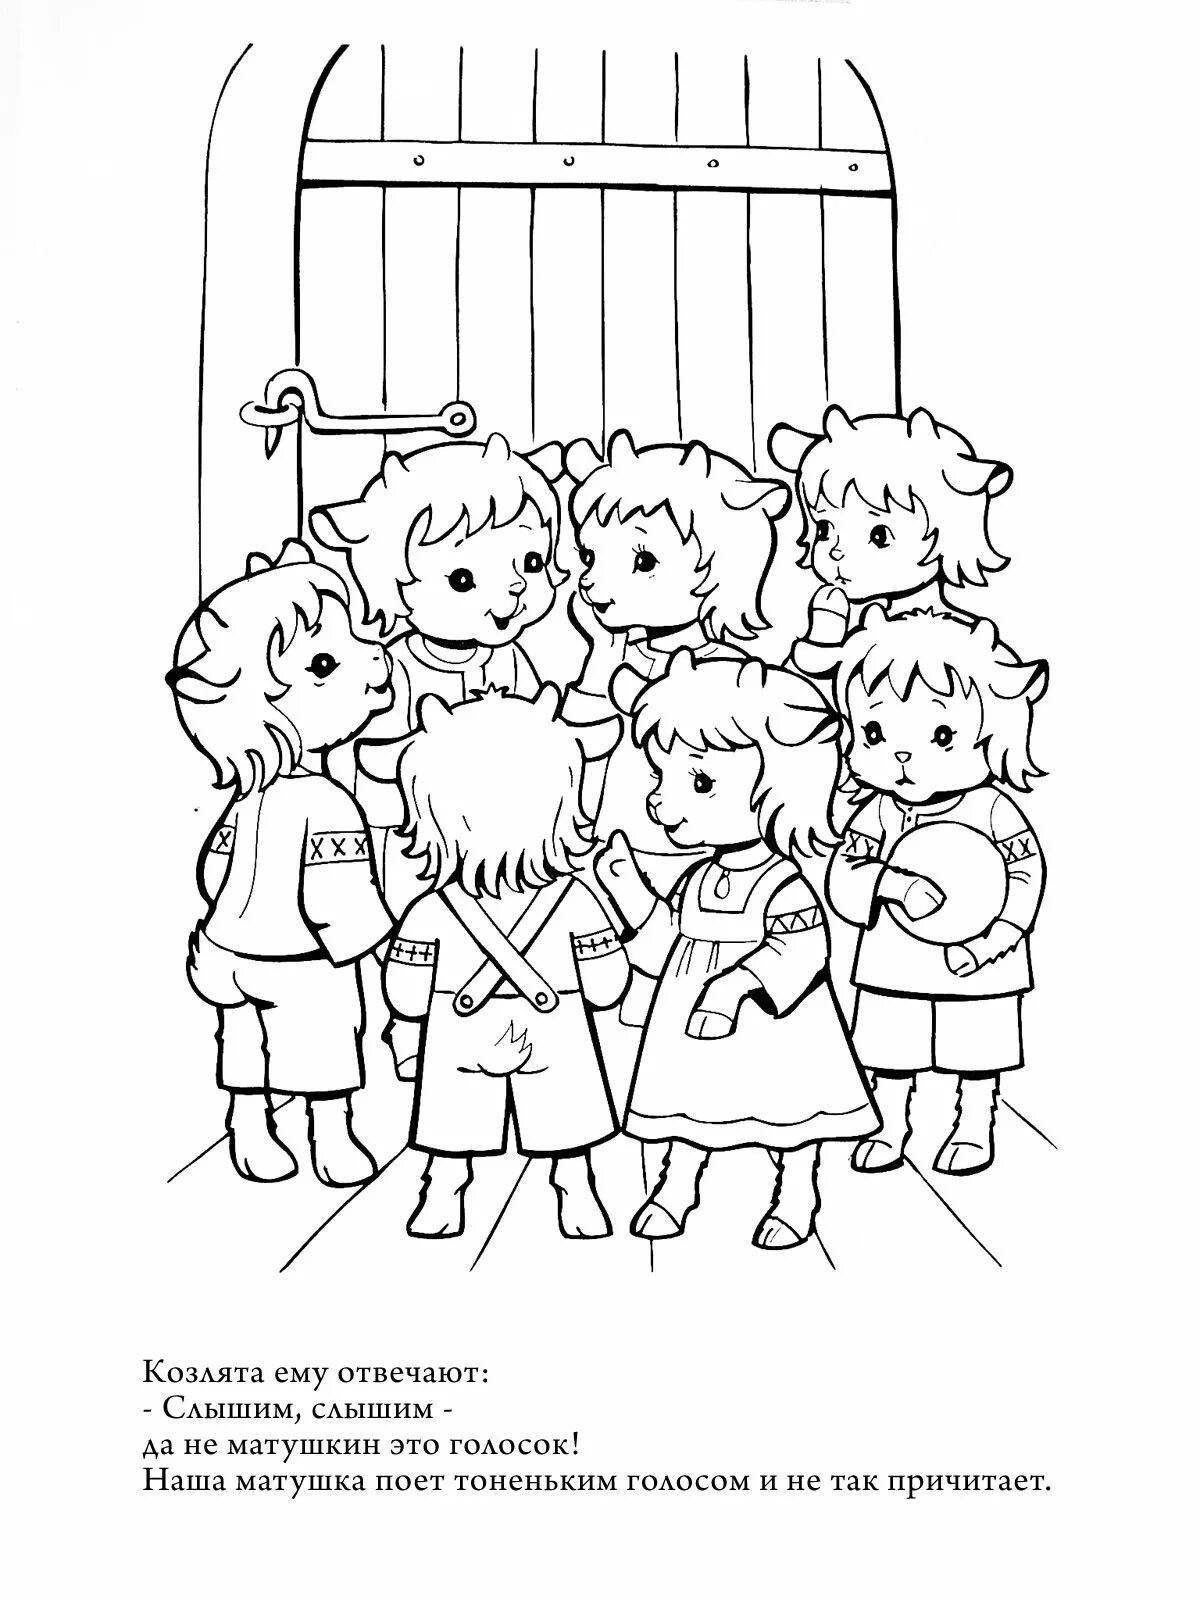 Adorable coloring book of a fabulous wolf and seven kids